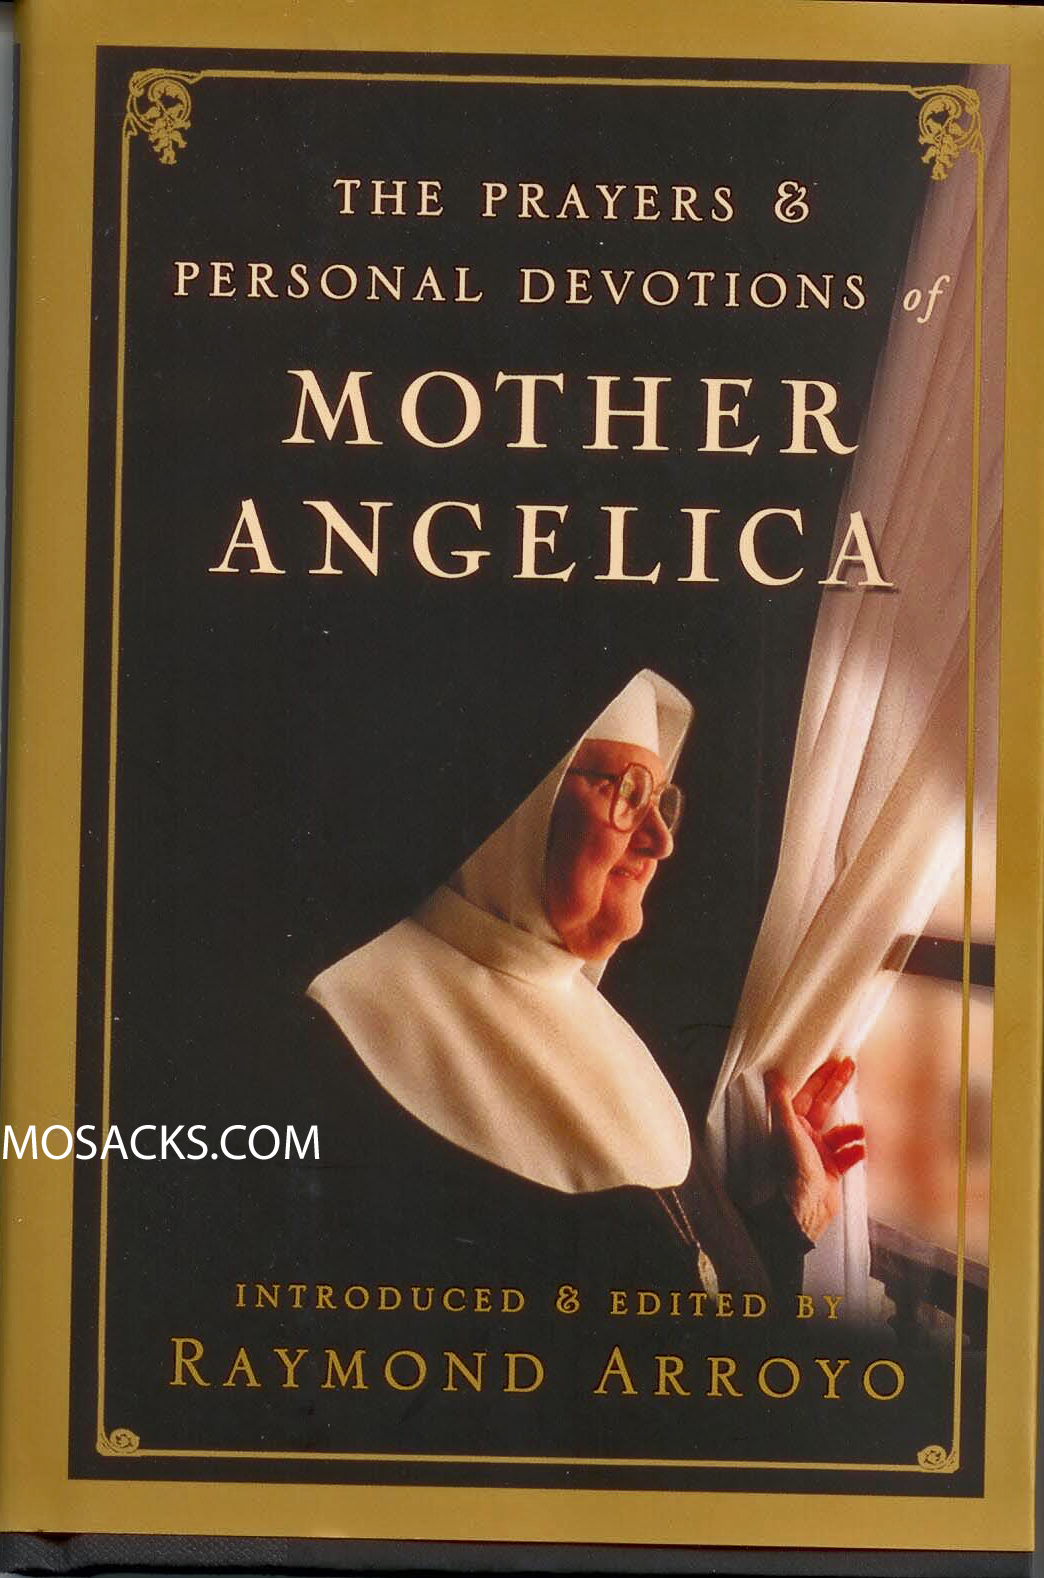 The Prayers & Personal Devotions of Mother Angelica ISBN 9780307588258